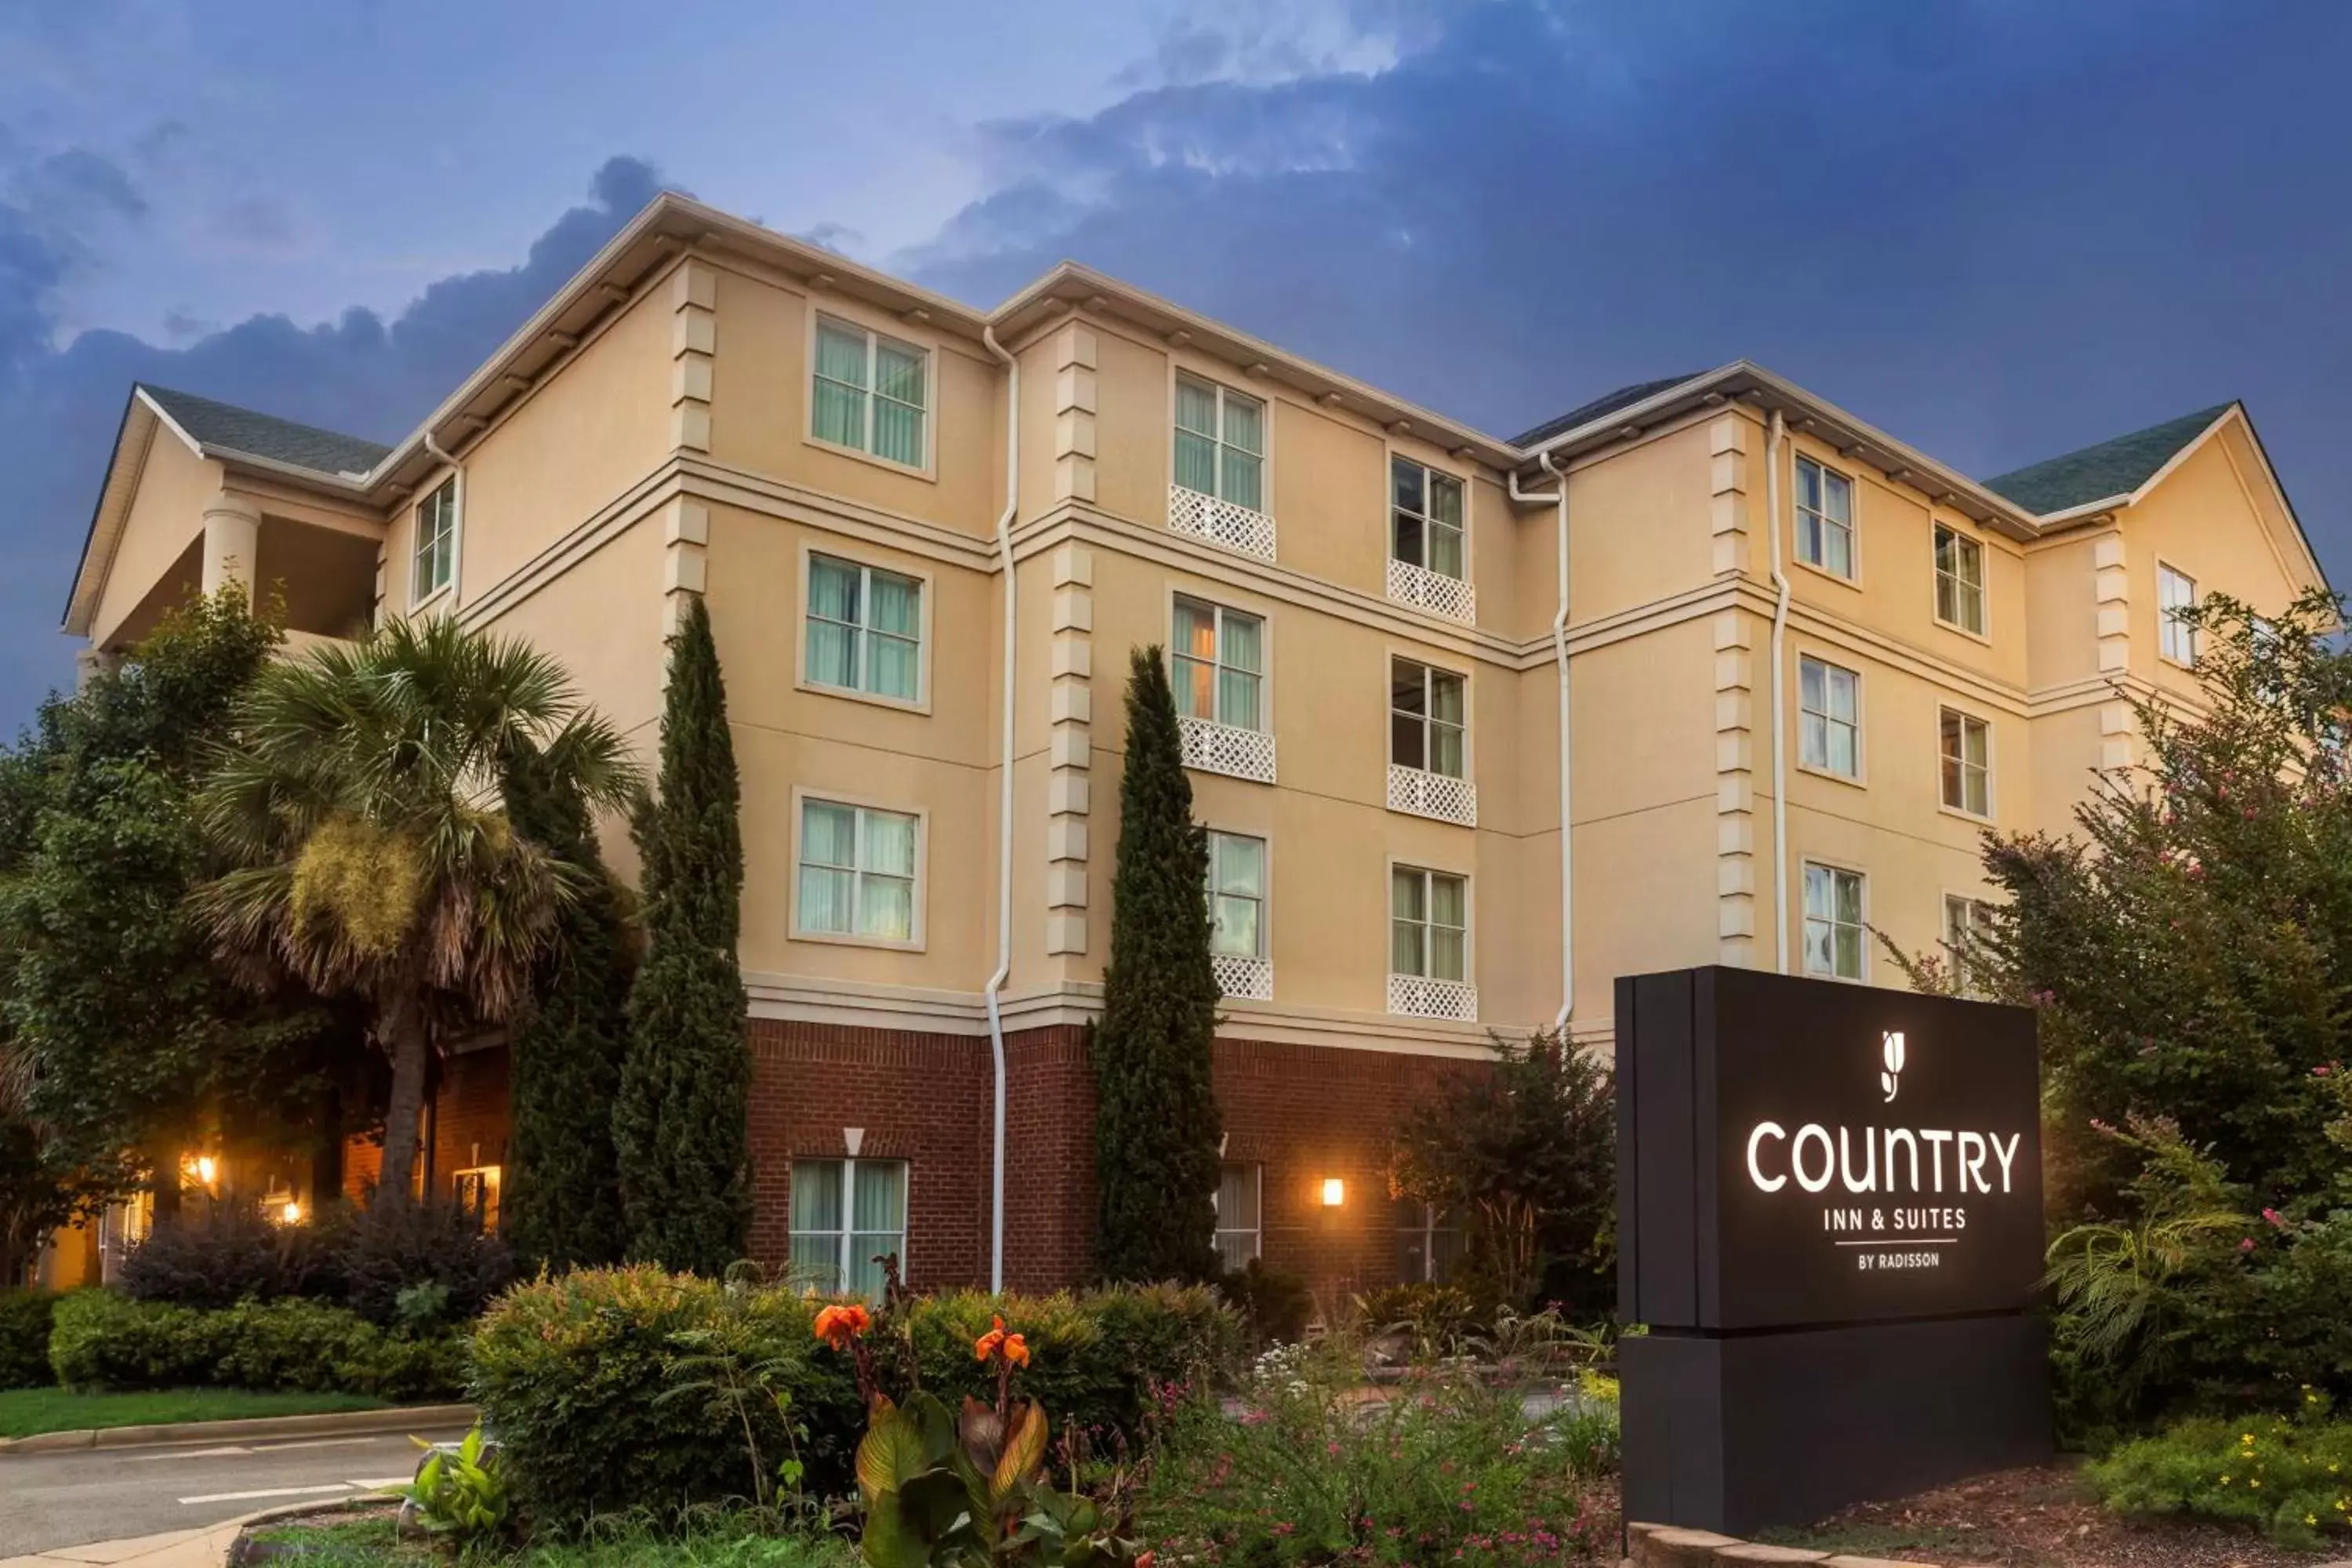 Property Building in Country Inn & Suites by Radisson, Athens, GA